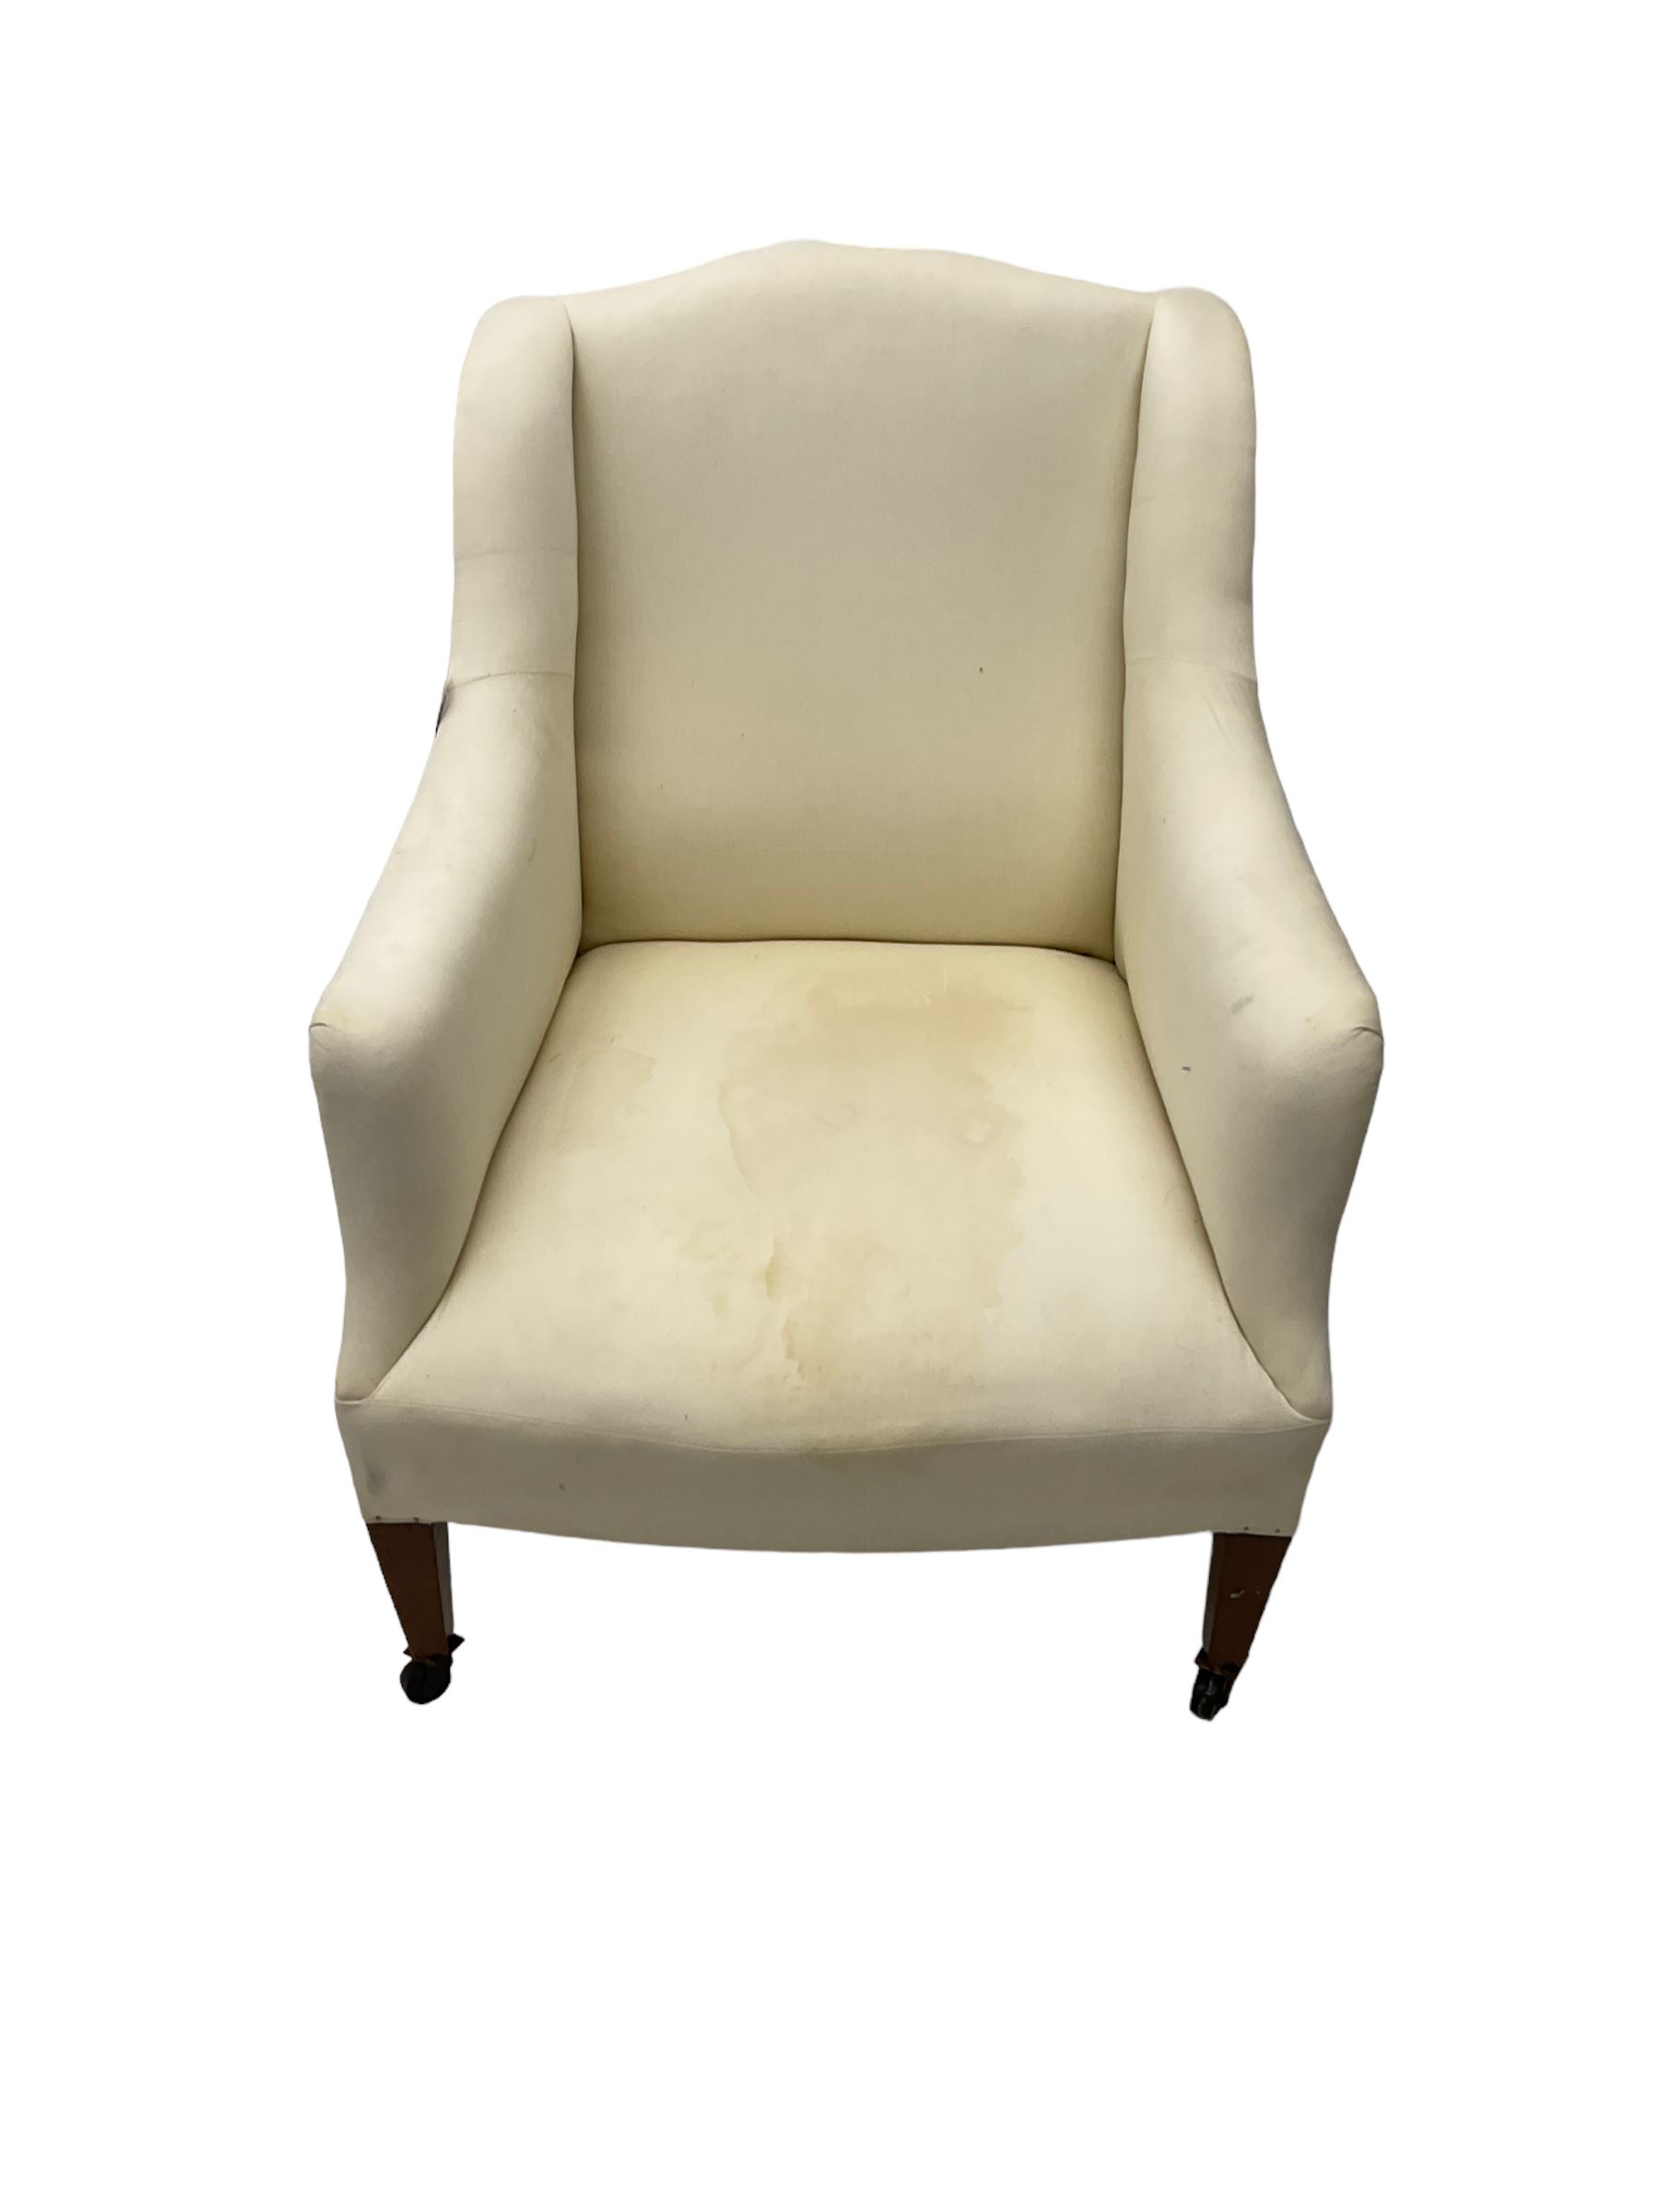 Edwardian wingback armchair - Image 4 of 5